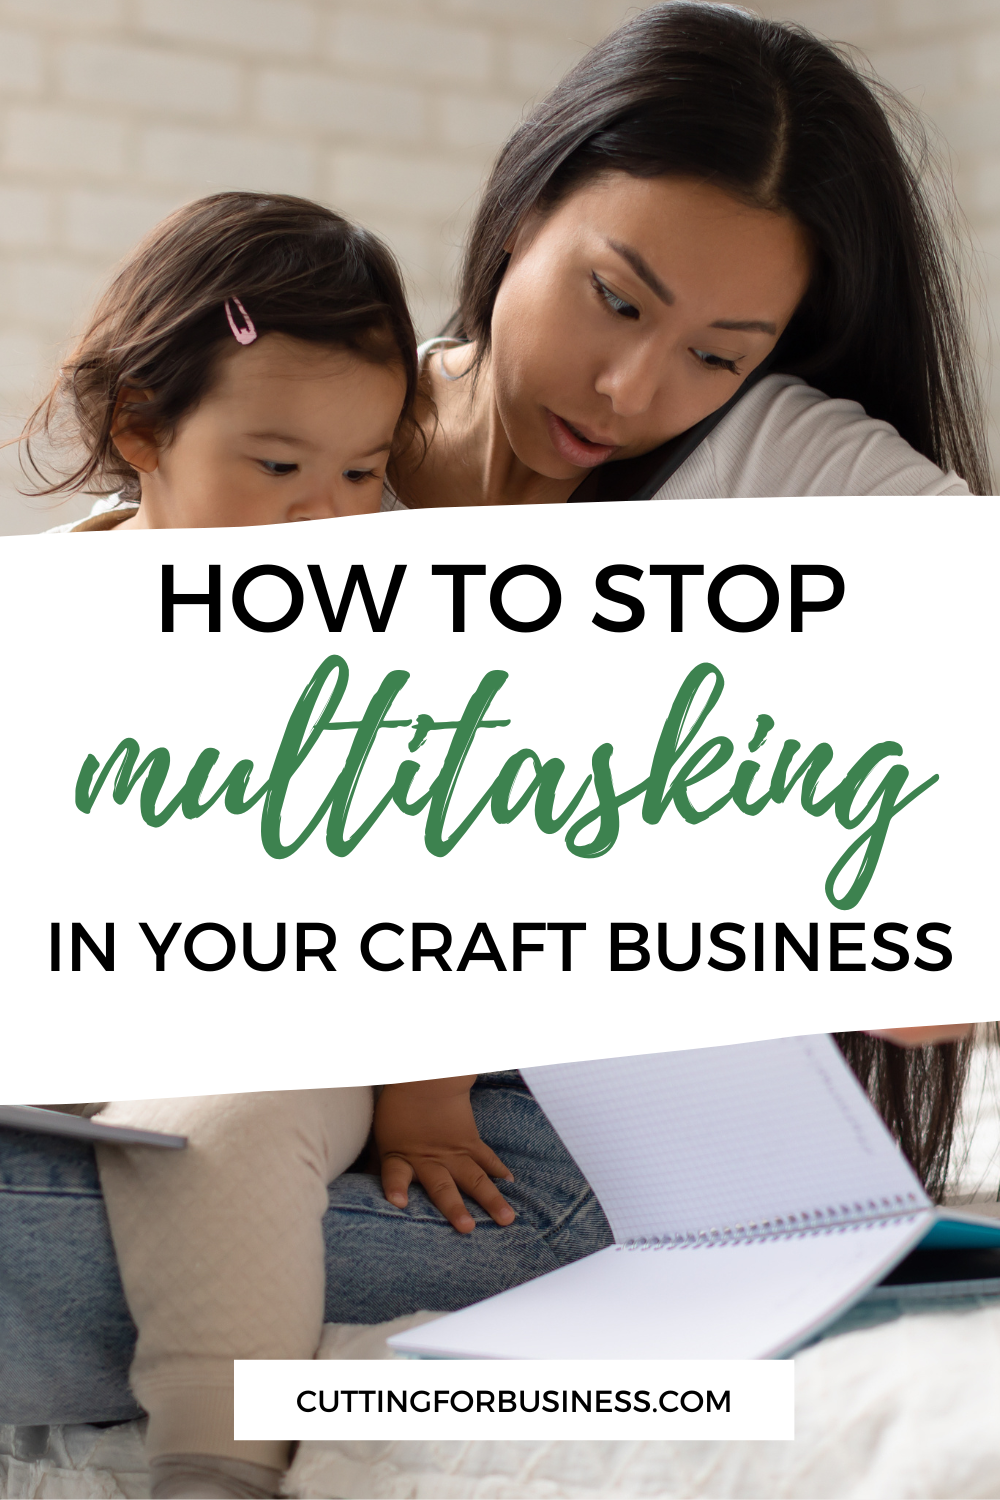 5 Ways to Stop Multitasking in Your Craft Business - cuttingforbusiness.com